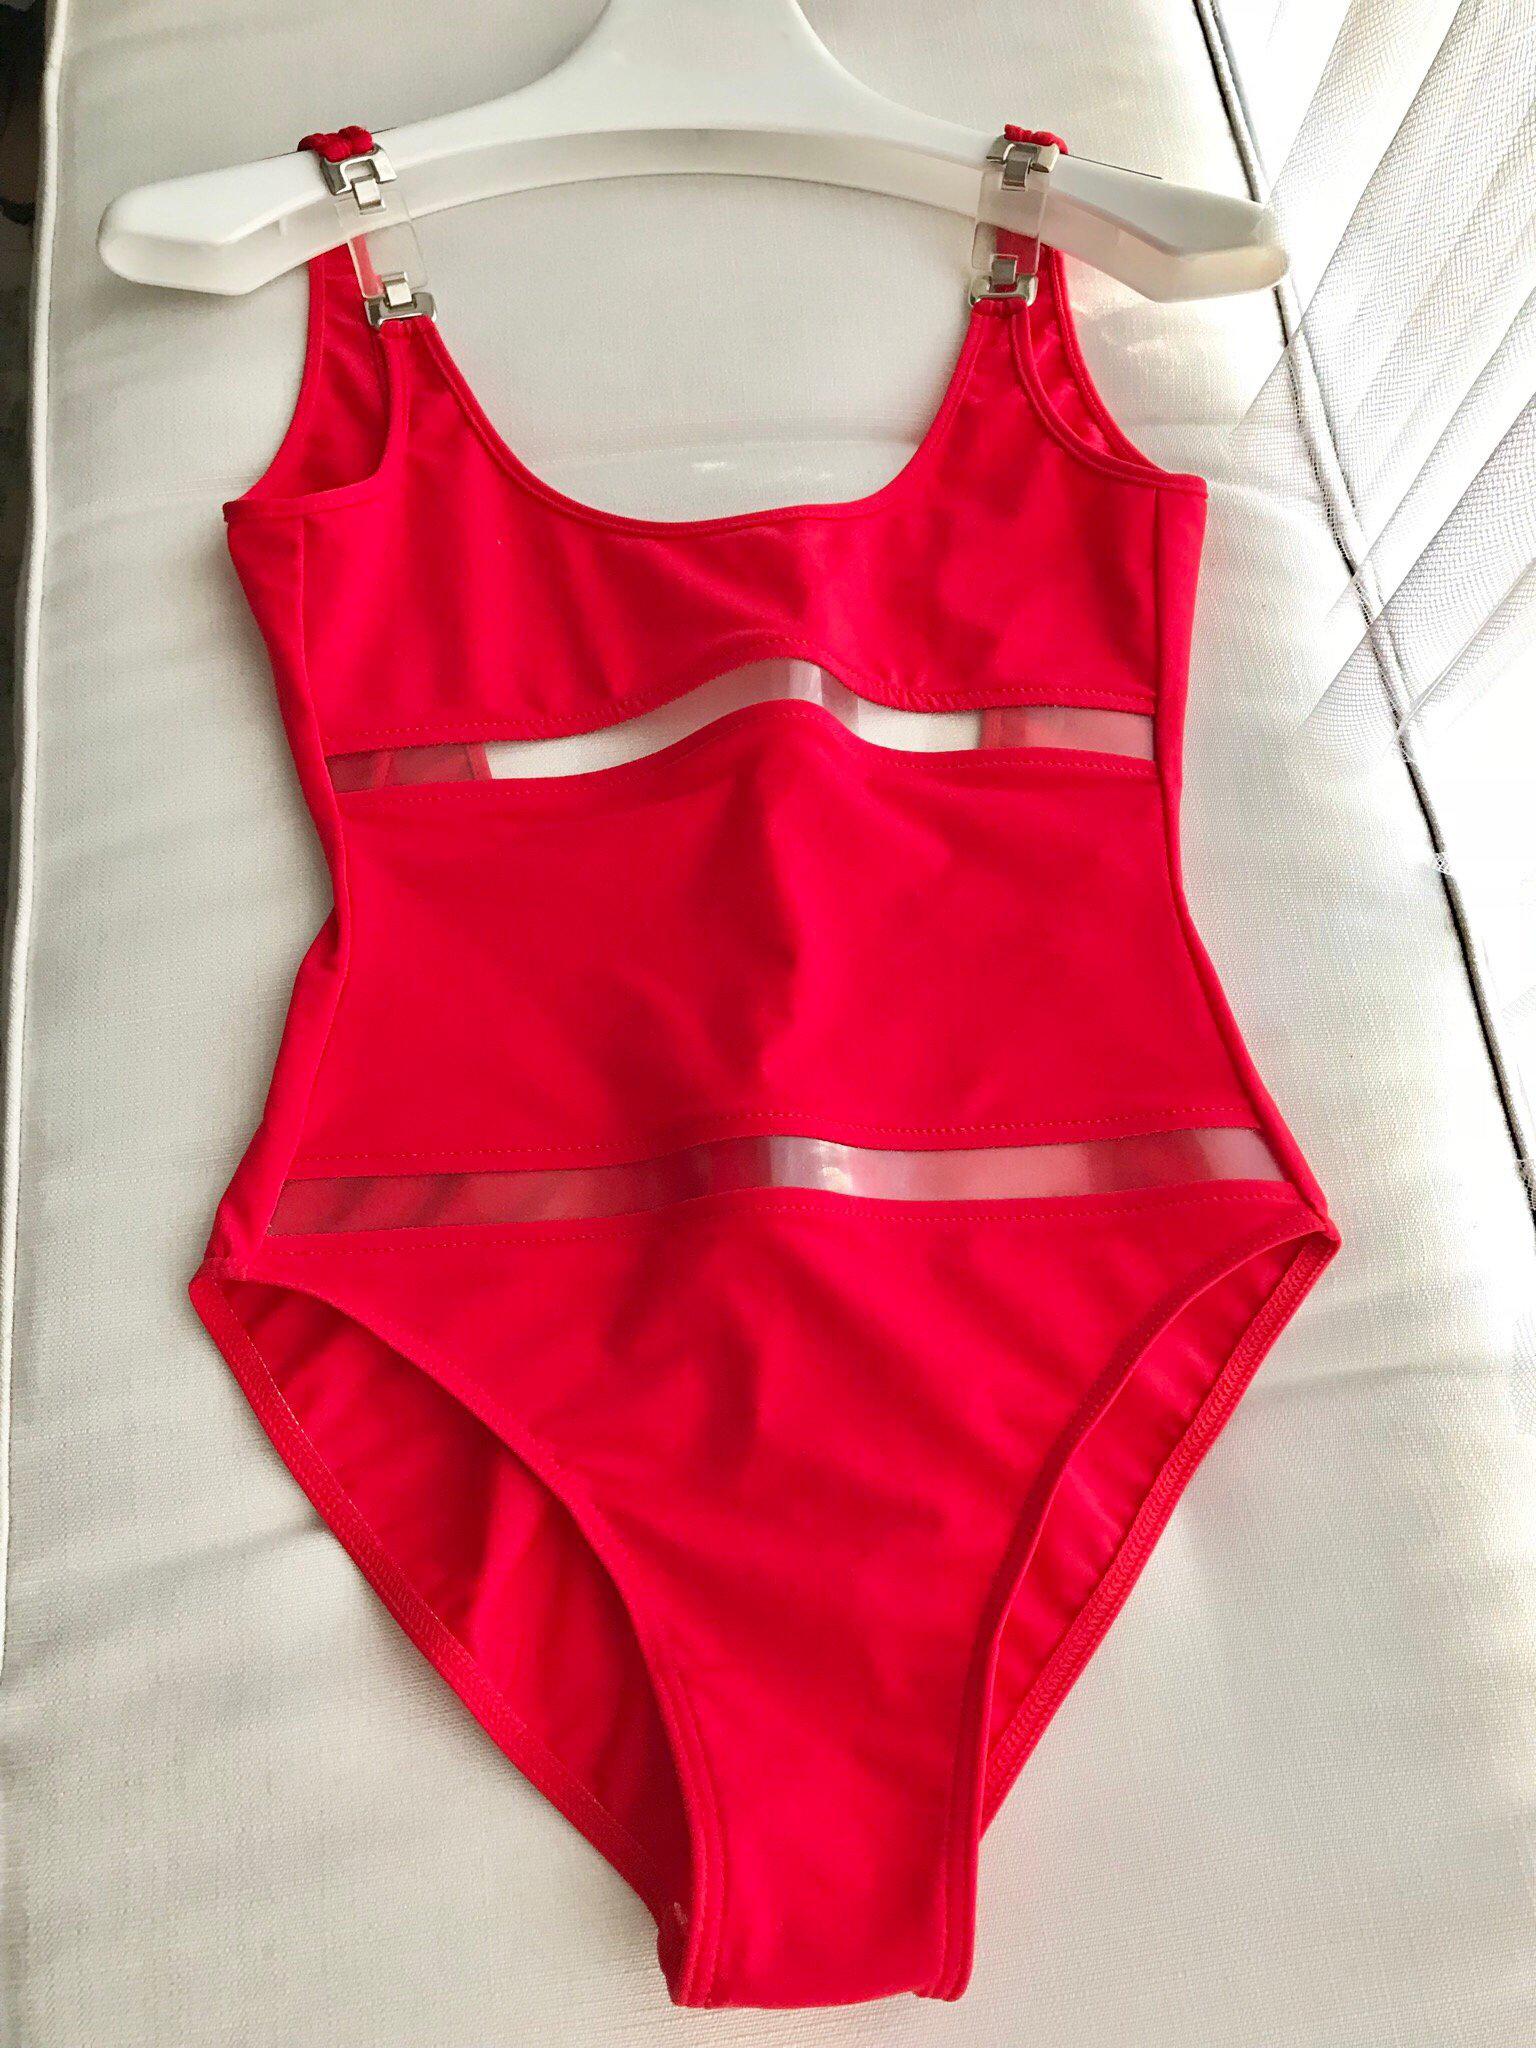 Paco Rabanne Red One Piece Bathing suit 3